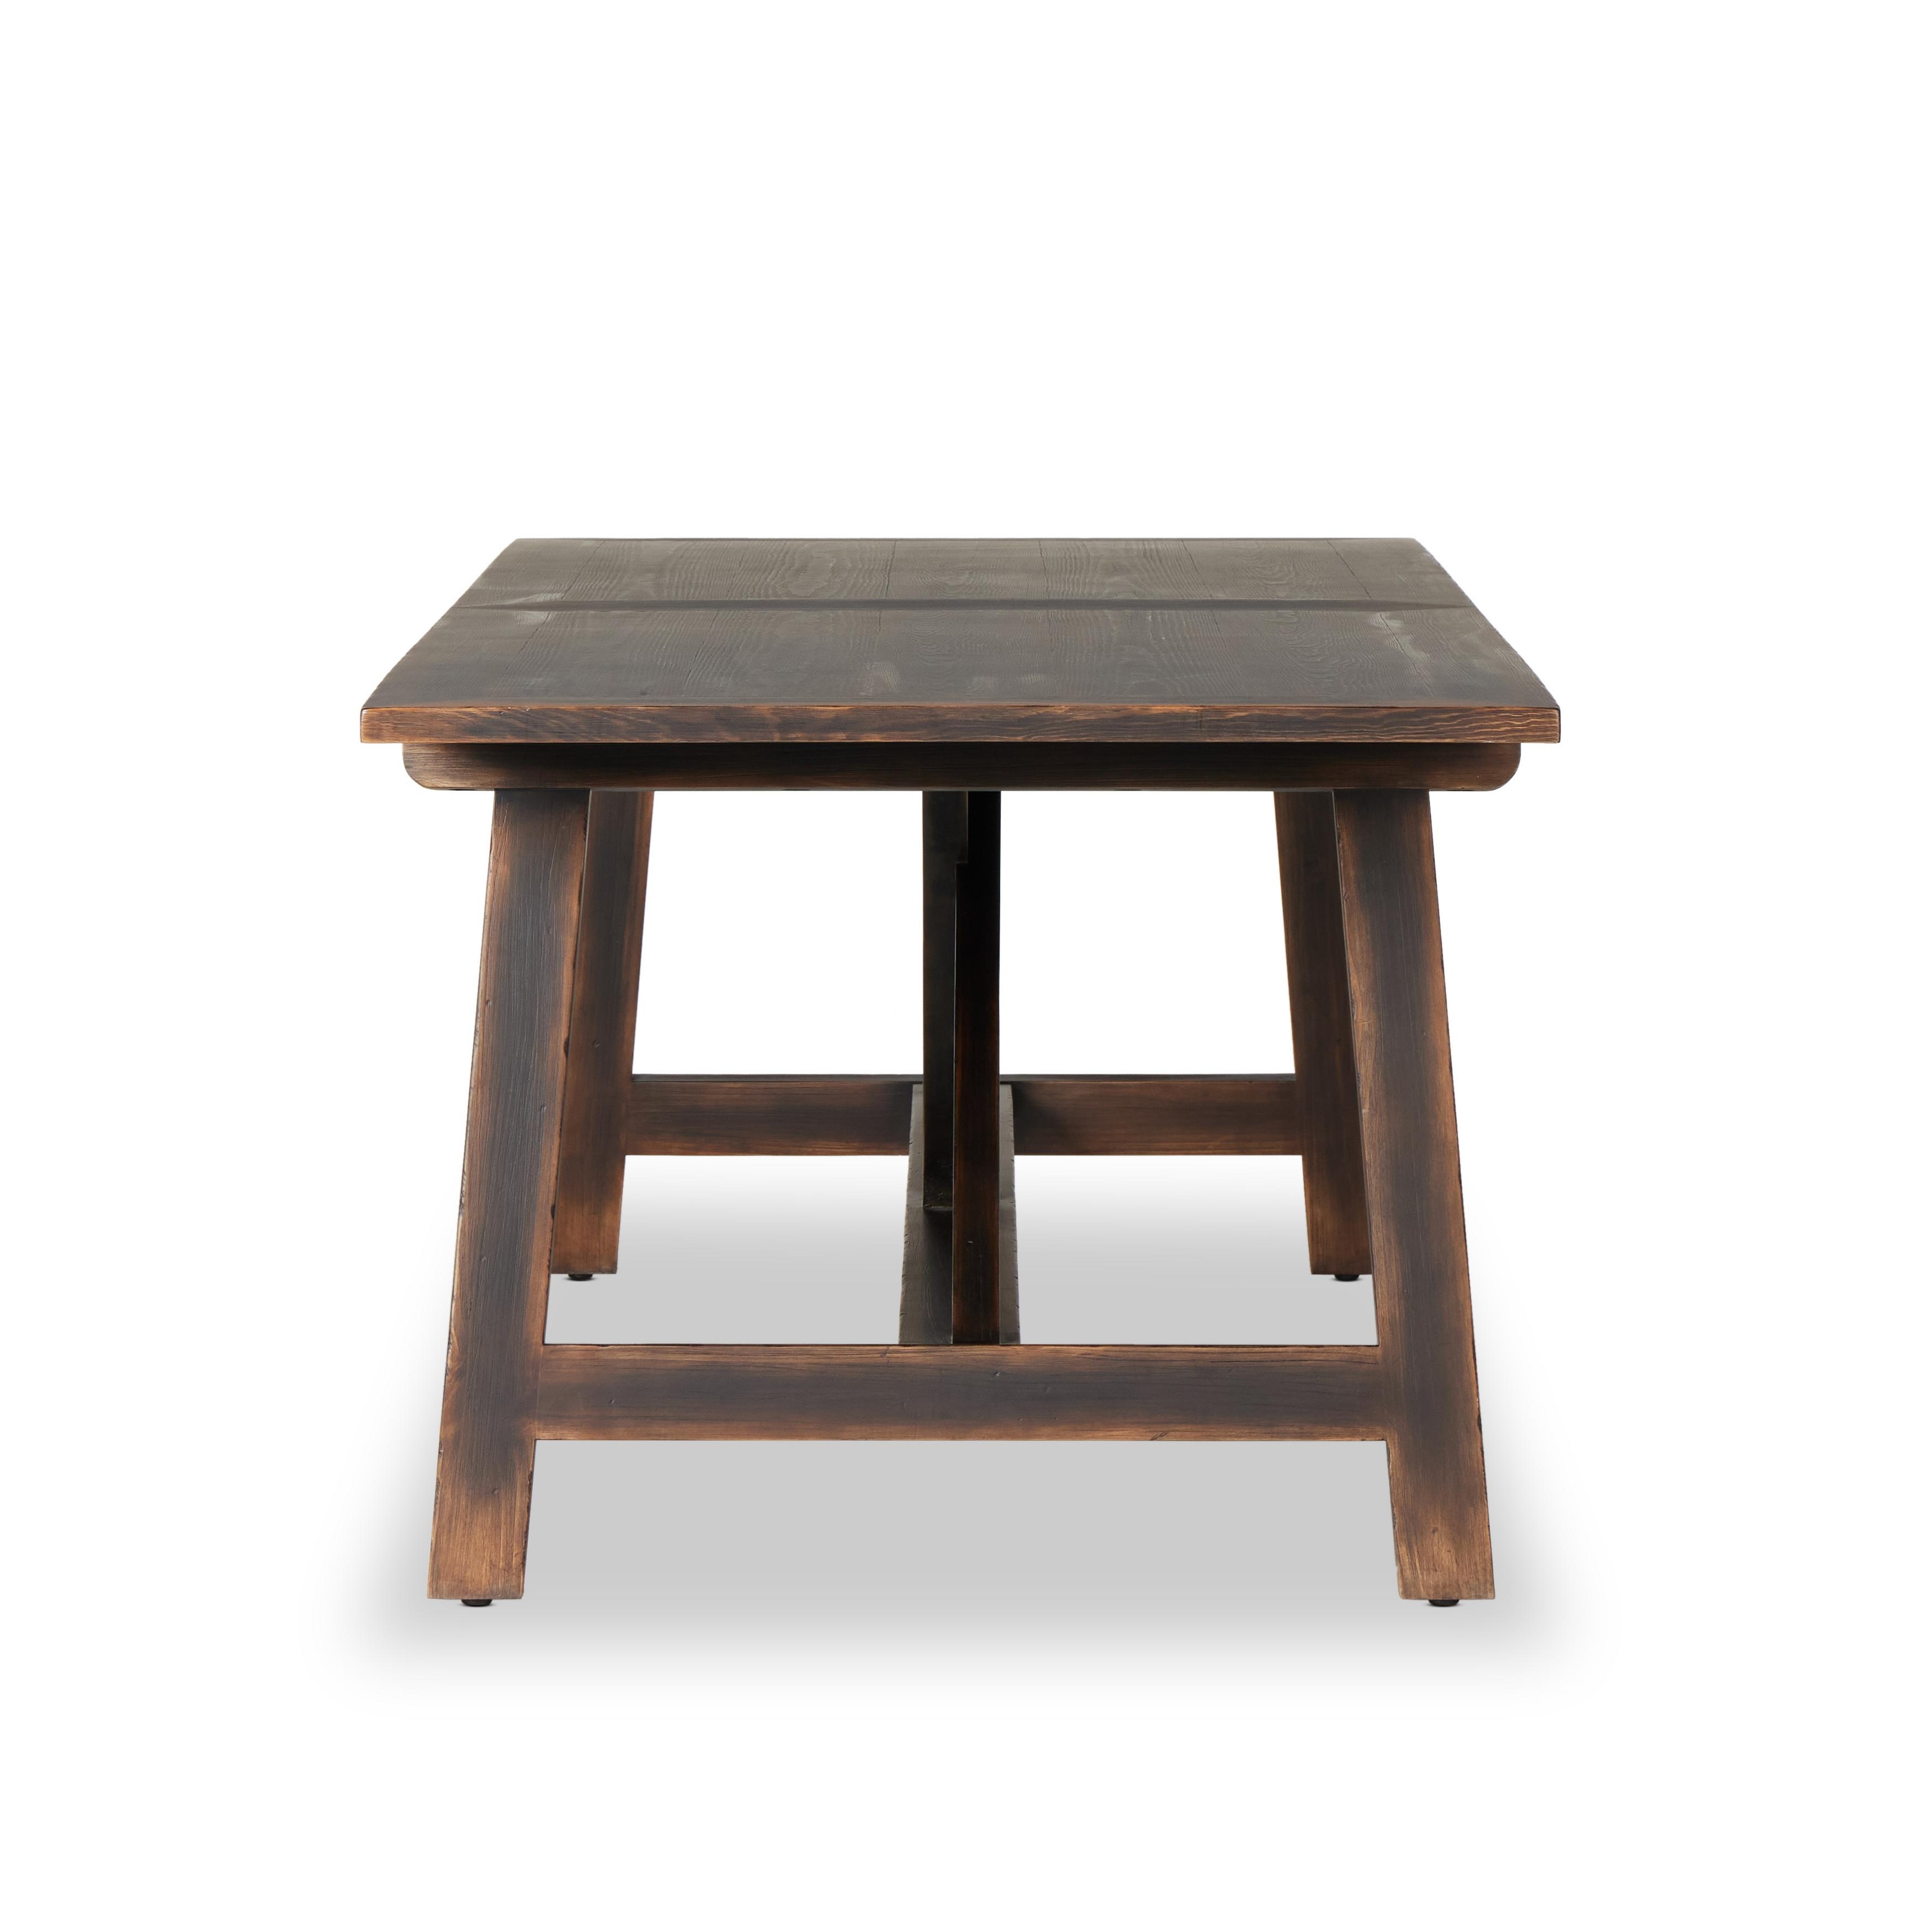 The 1500 Kilometer Dining Table-Agd Brwn - Image 4